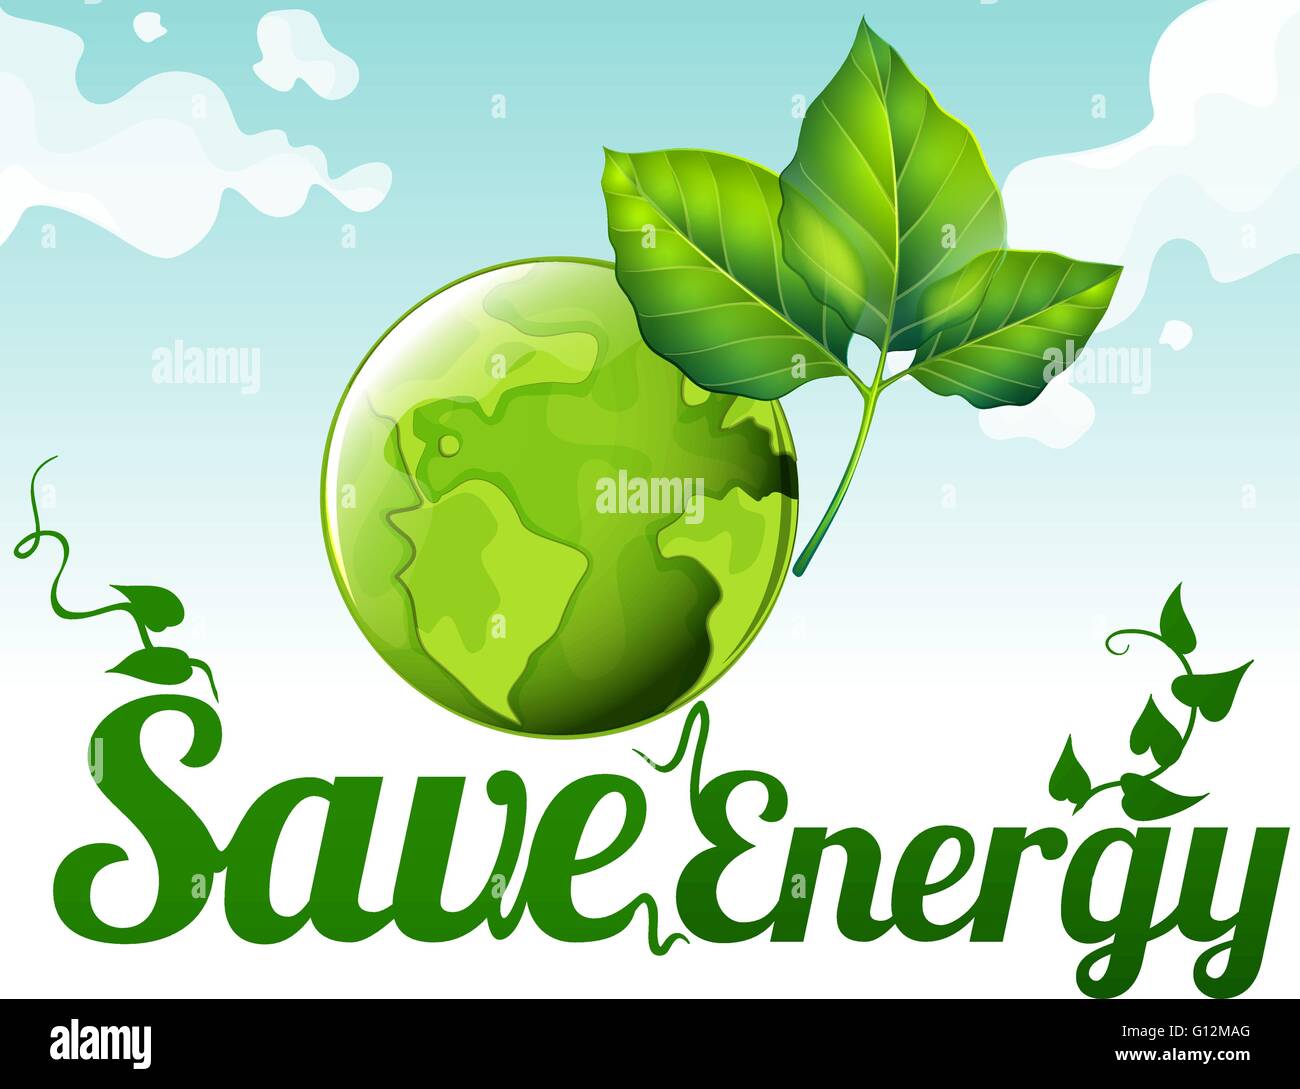 Save Energy With Earth And Green Leaves Illustration Stock Vector Image Art Alamy